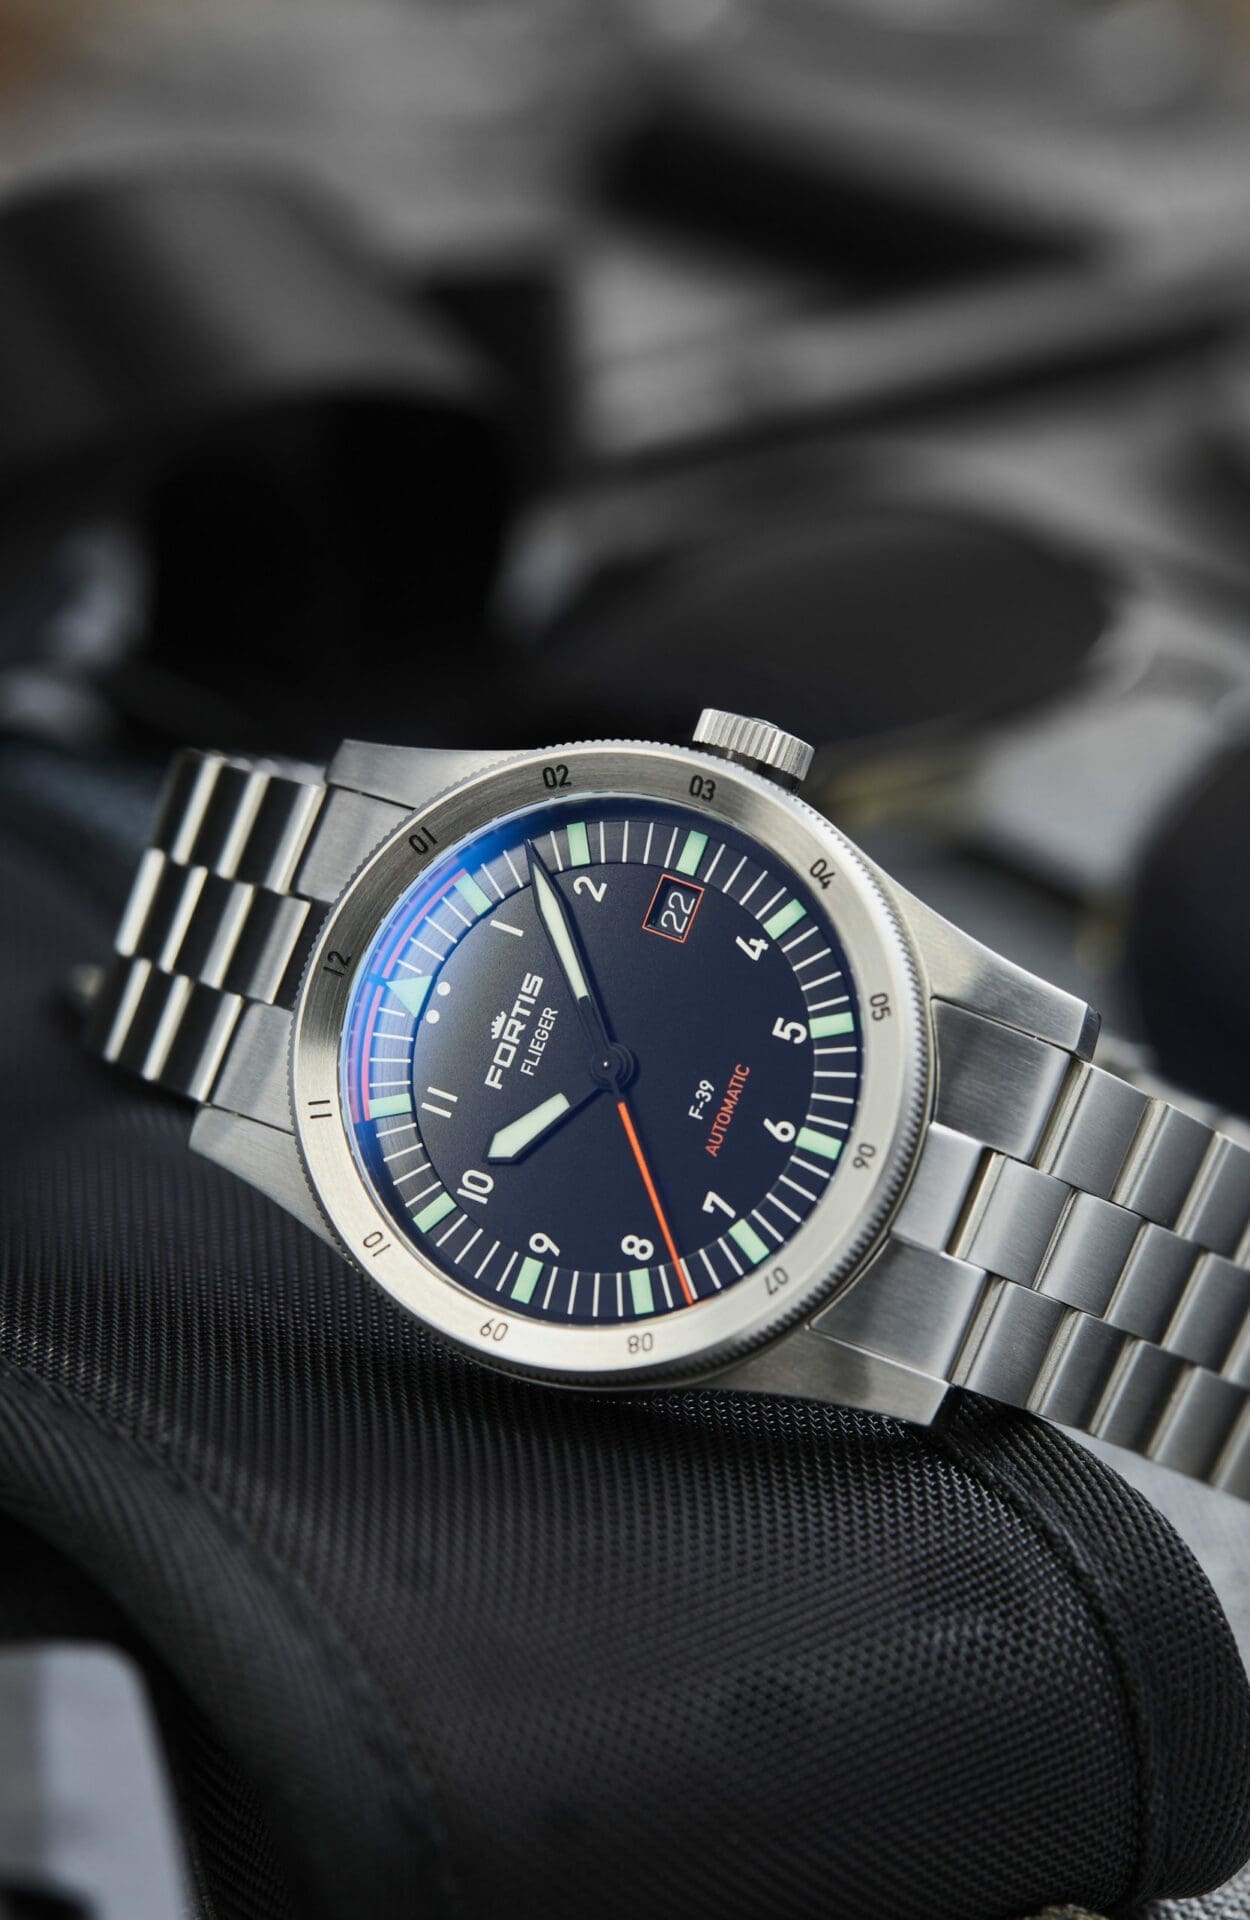 The Fortis Flieger F-39 is a capable alt-take on a pilot’s watch